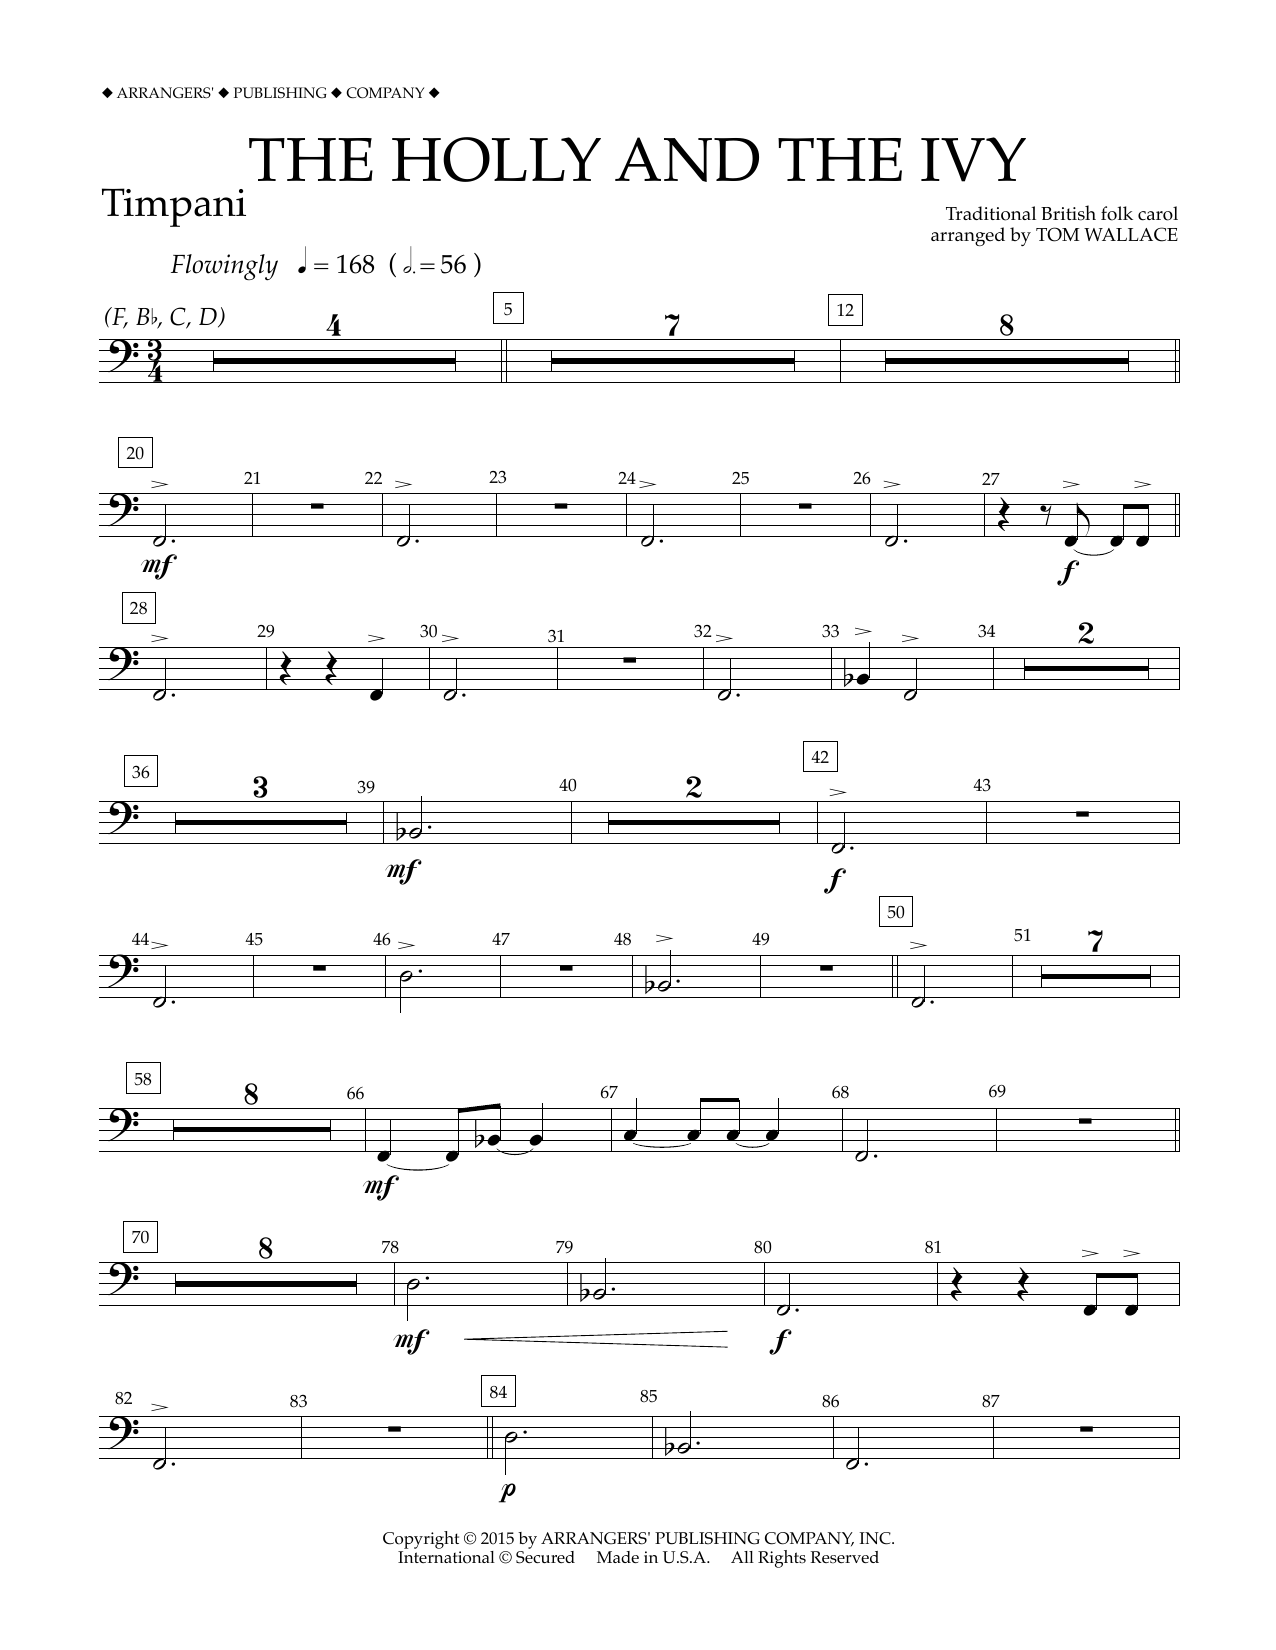 Download Tom Wallace The Holly and the Ivy - Timpani Sheet Music